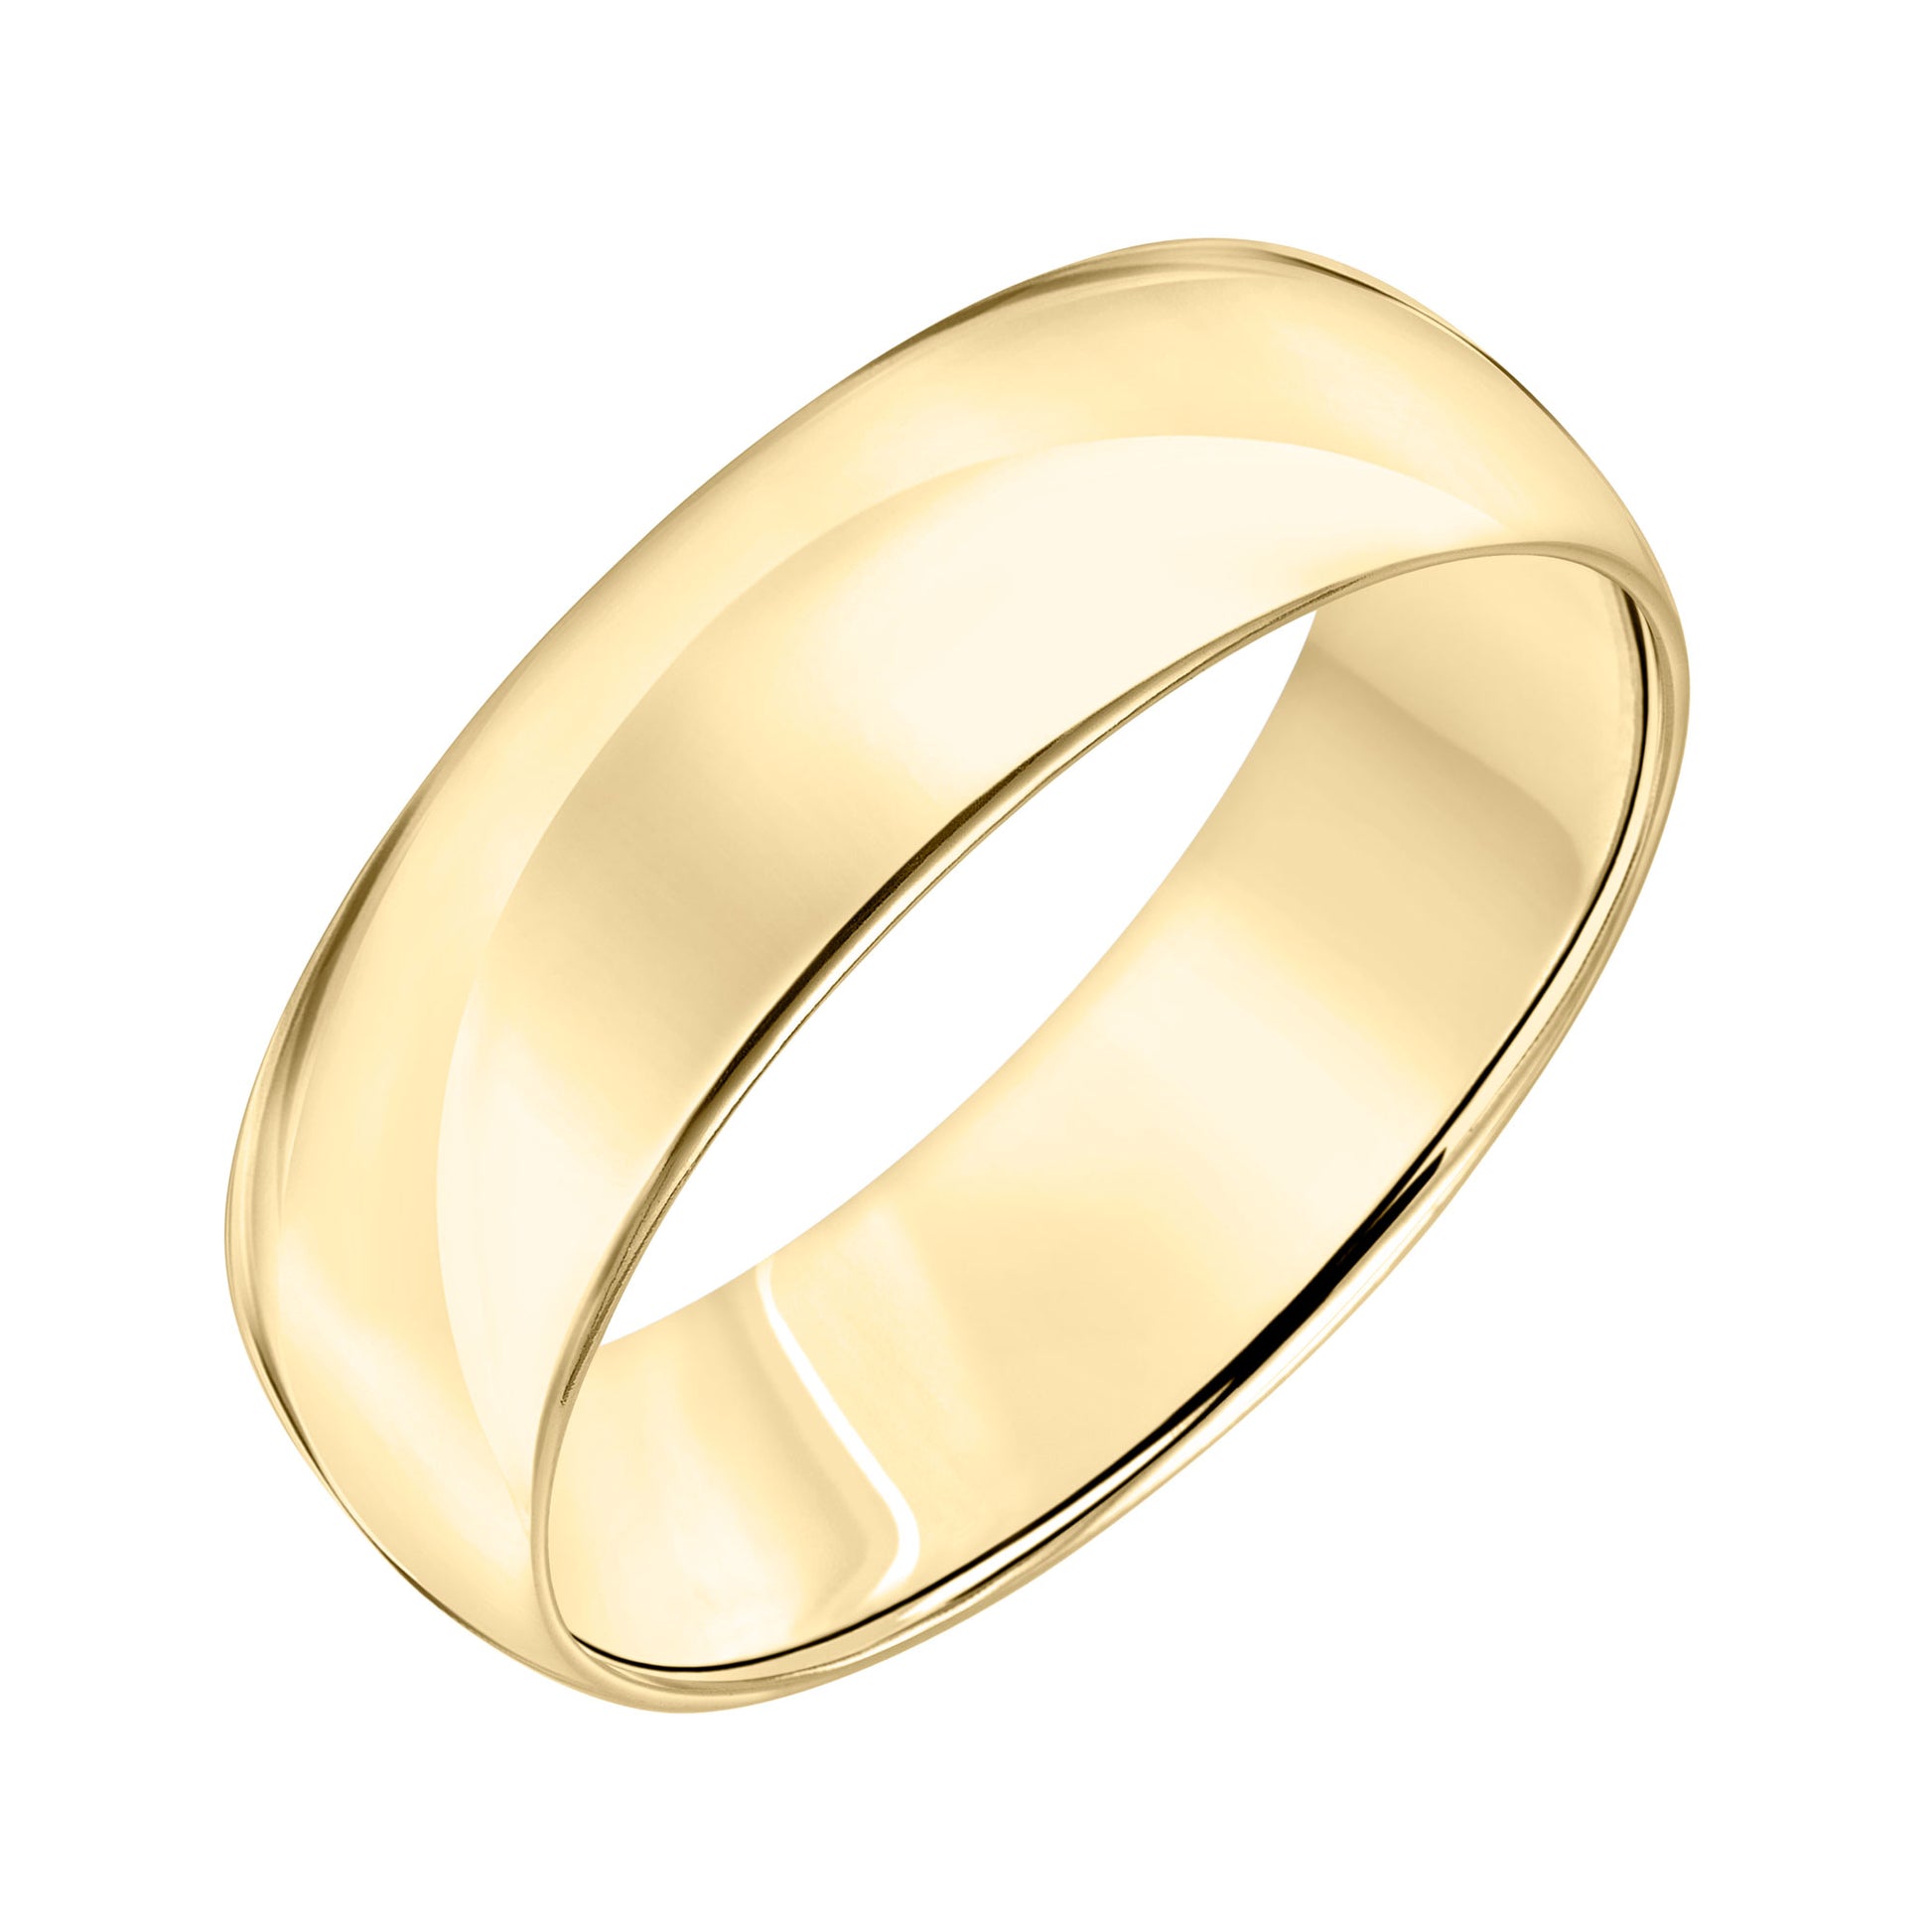 Roux 7mm Light Low Dome Wedding Ring